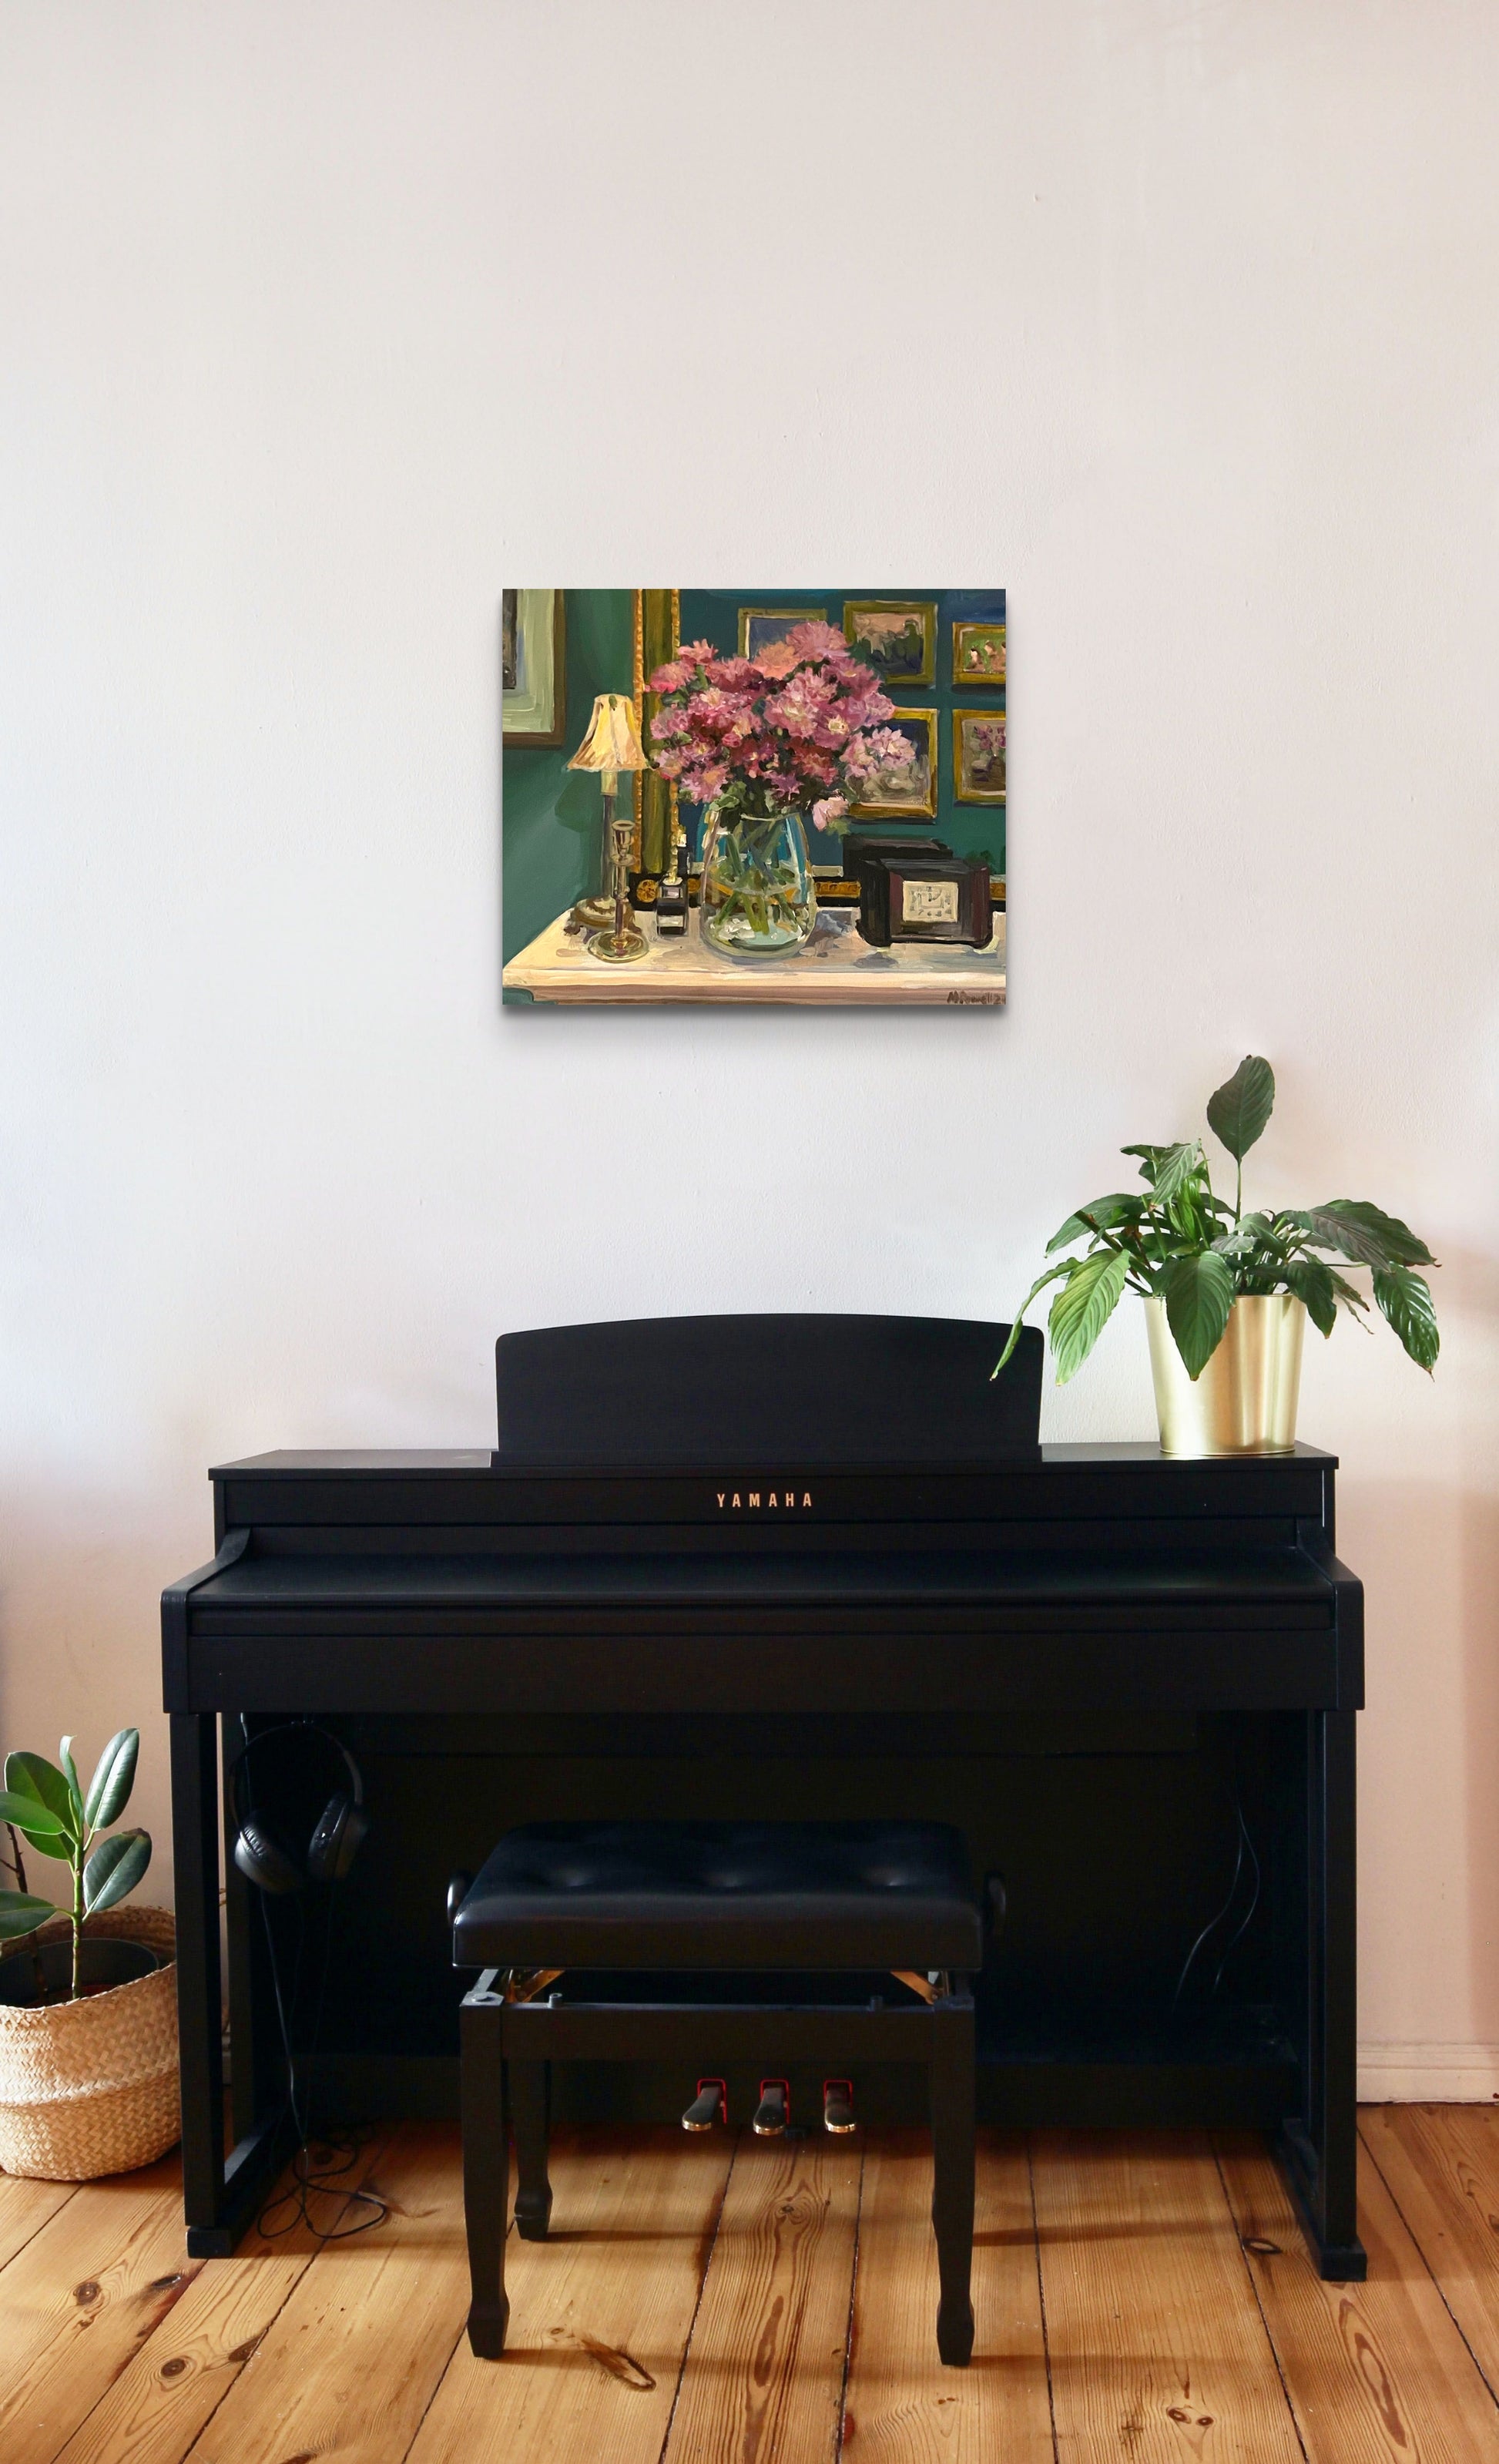 Original painting by Worcestershire artist Margaret Powell of Asters in the Dining Room.  Displayed on a white wall behind a black piano with a plant on it.